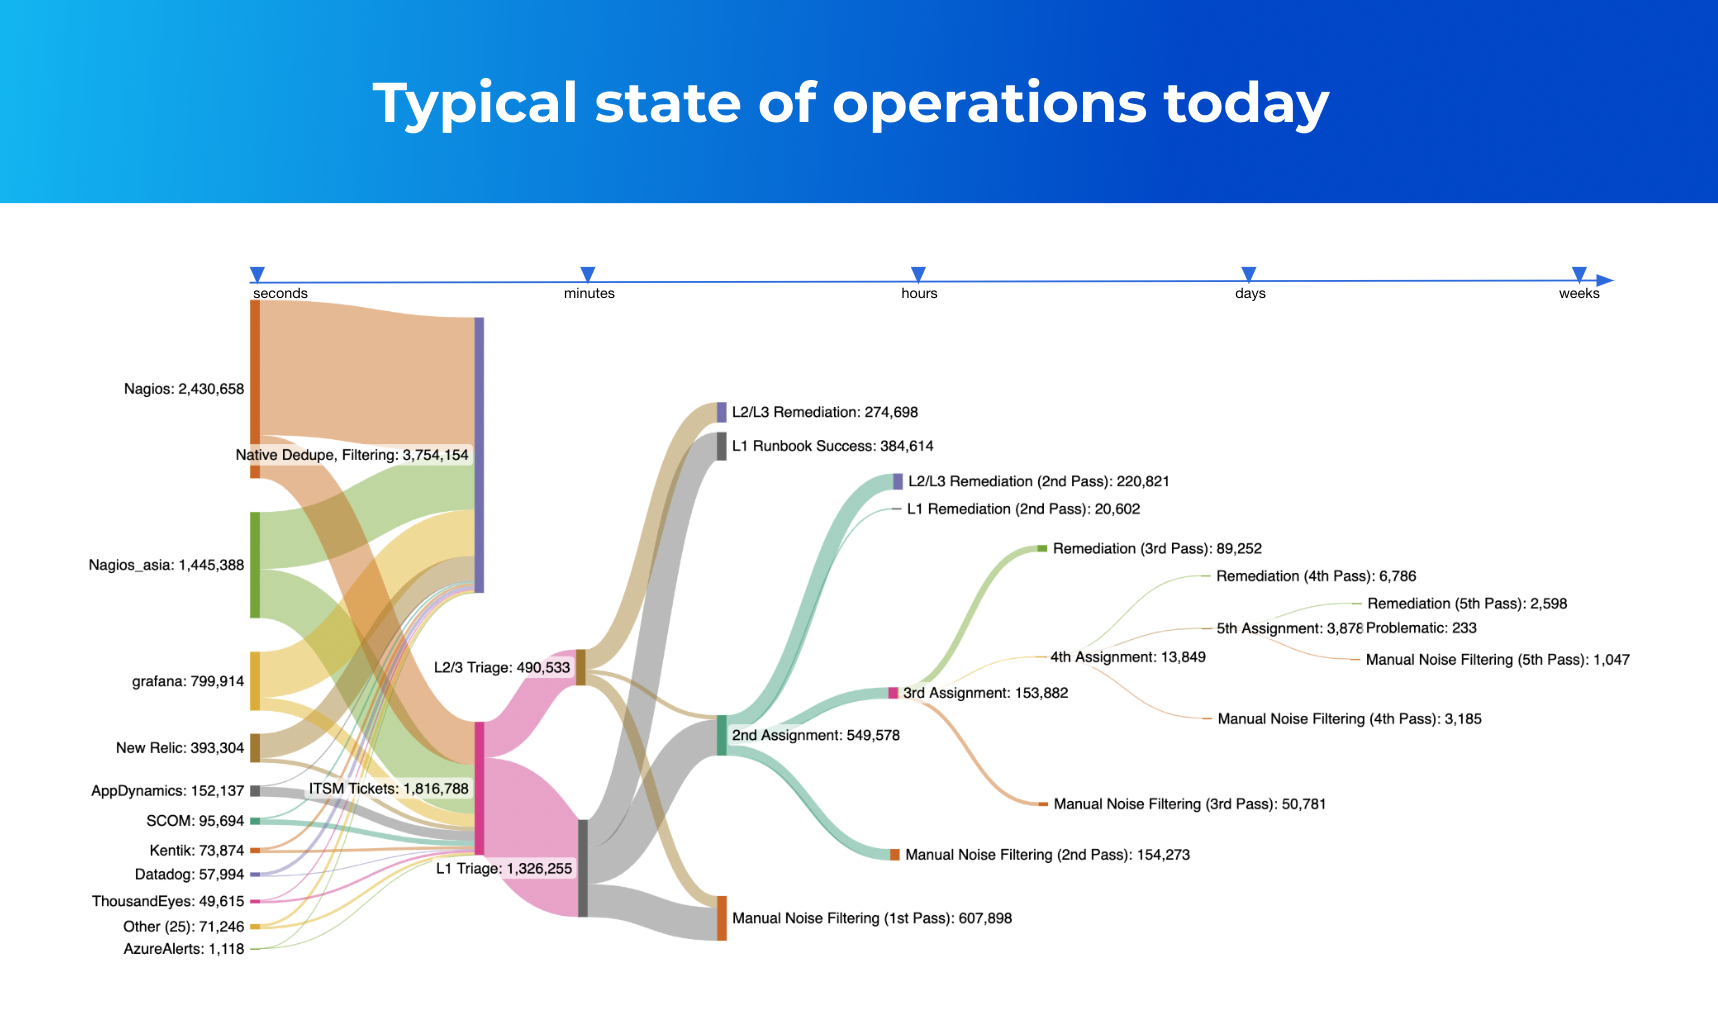 Typical status of operations today graphic